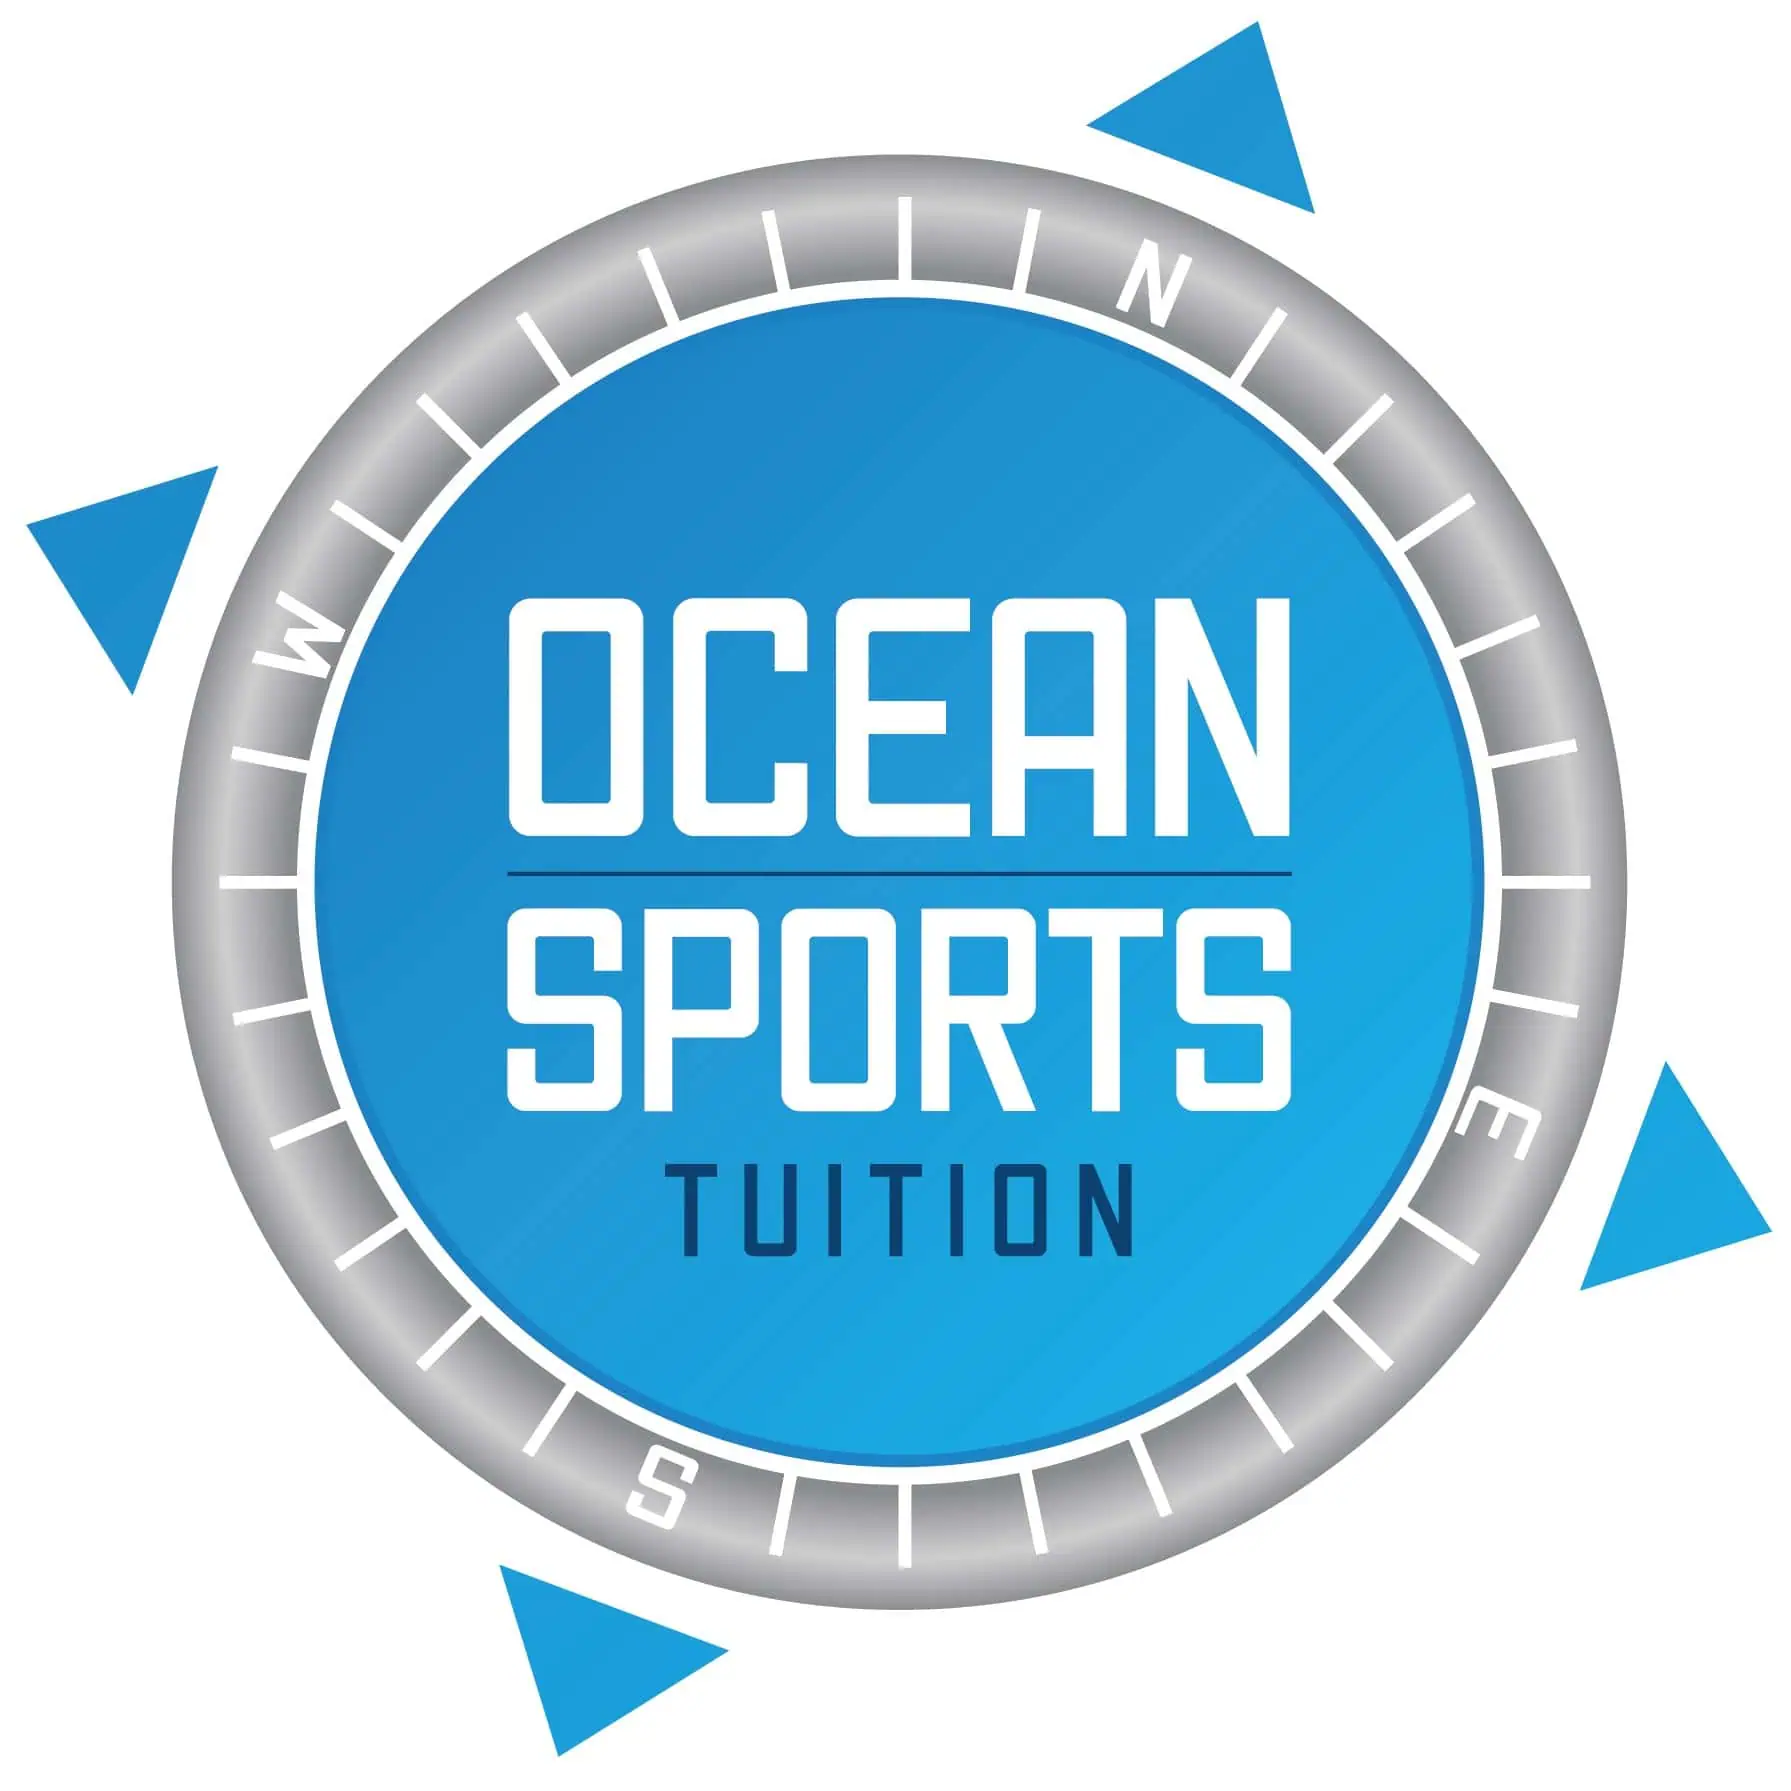 OCEAN-SPORTS-TUITION-LOGO-cropped